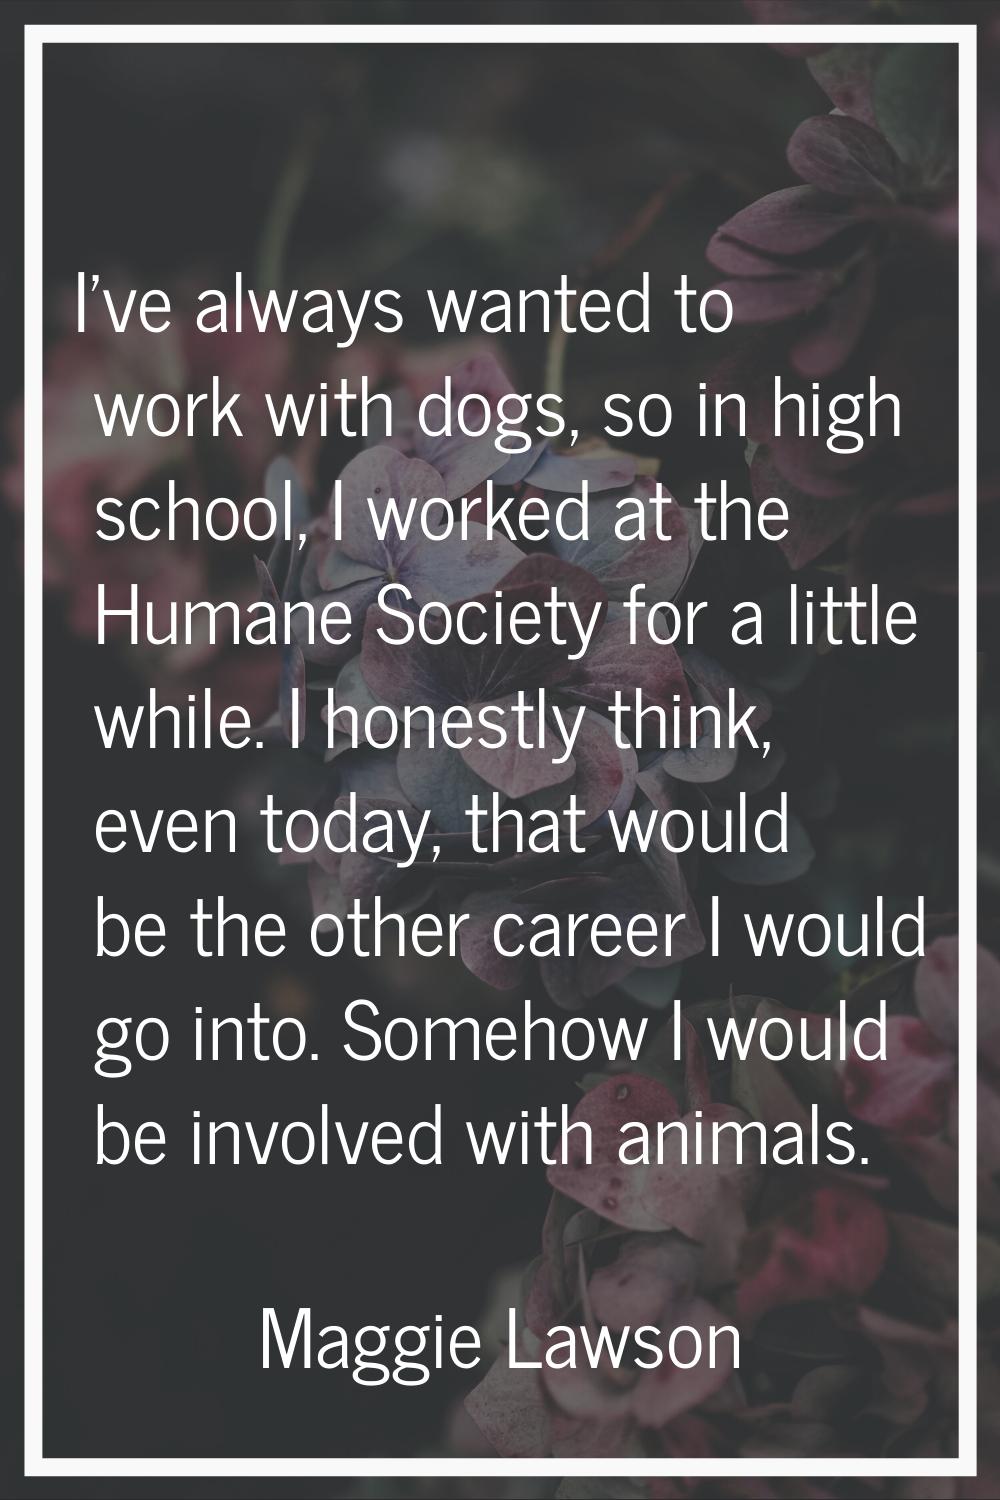 I've always wanted to work with dogs, so in high school, I worked at the Humane Society for a littl